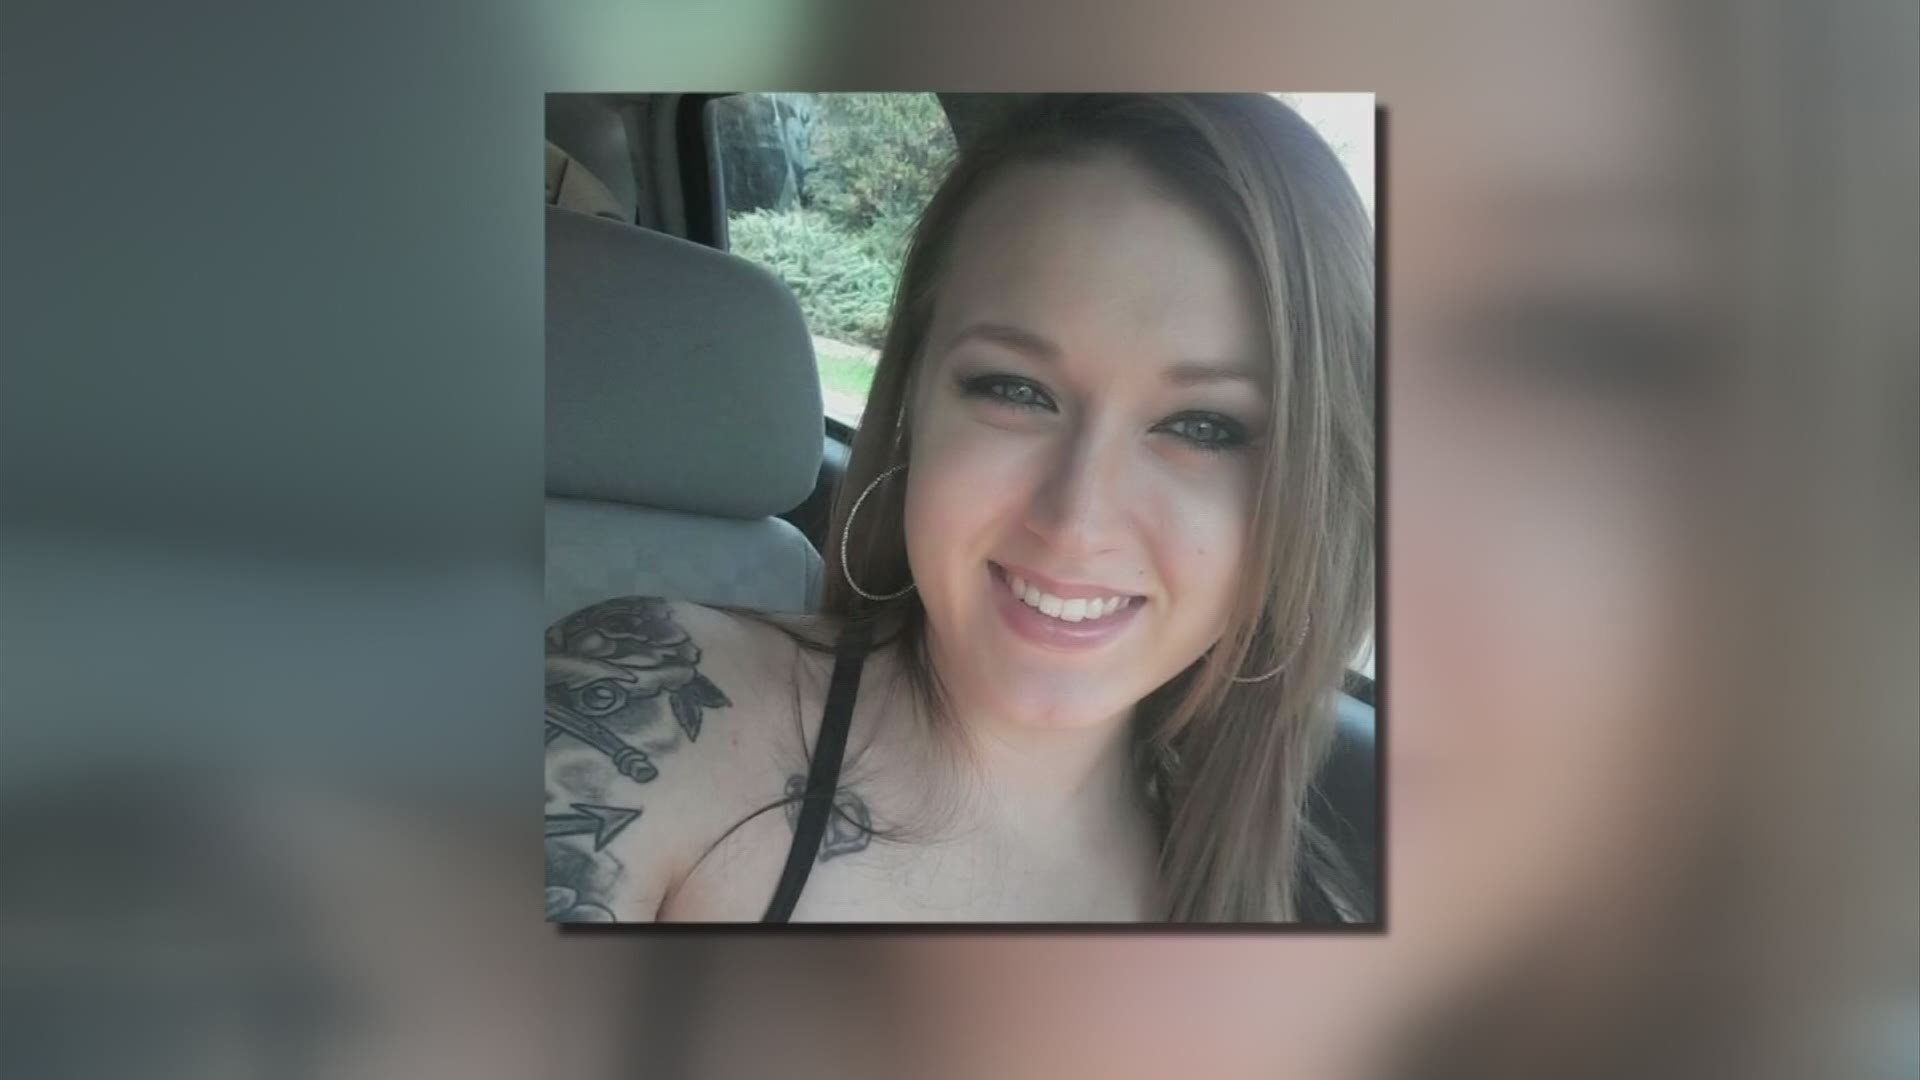 Donne Castleberry was shot and killed during an alleged prostitution sting in March 2018 by former Columbus Vice Officer Andrew Mitchell.